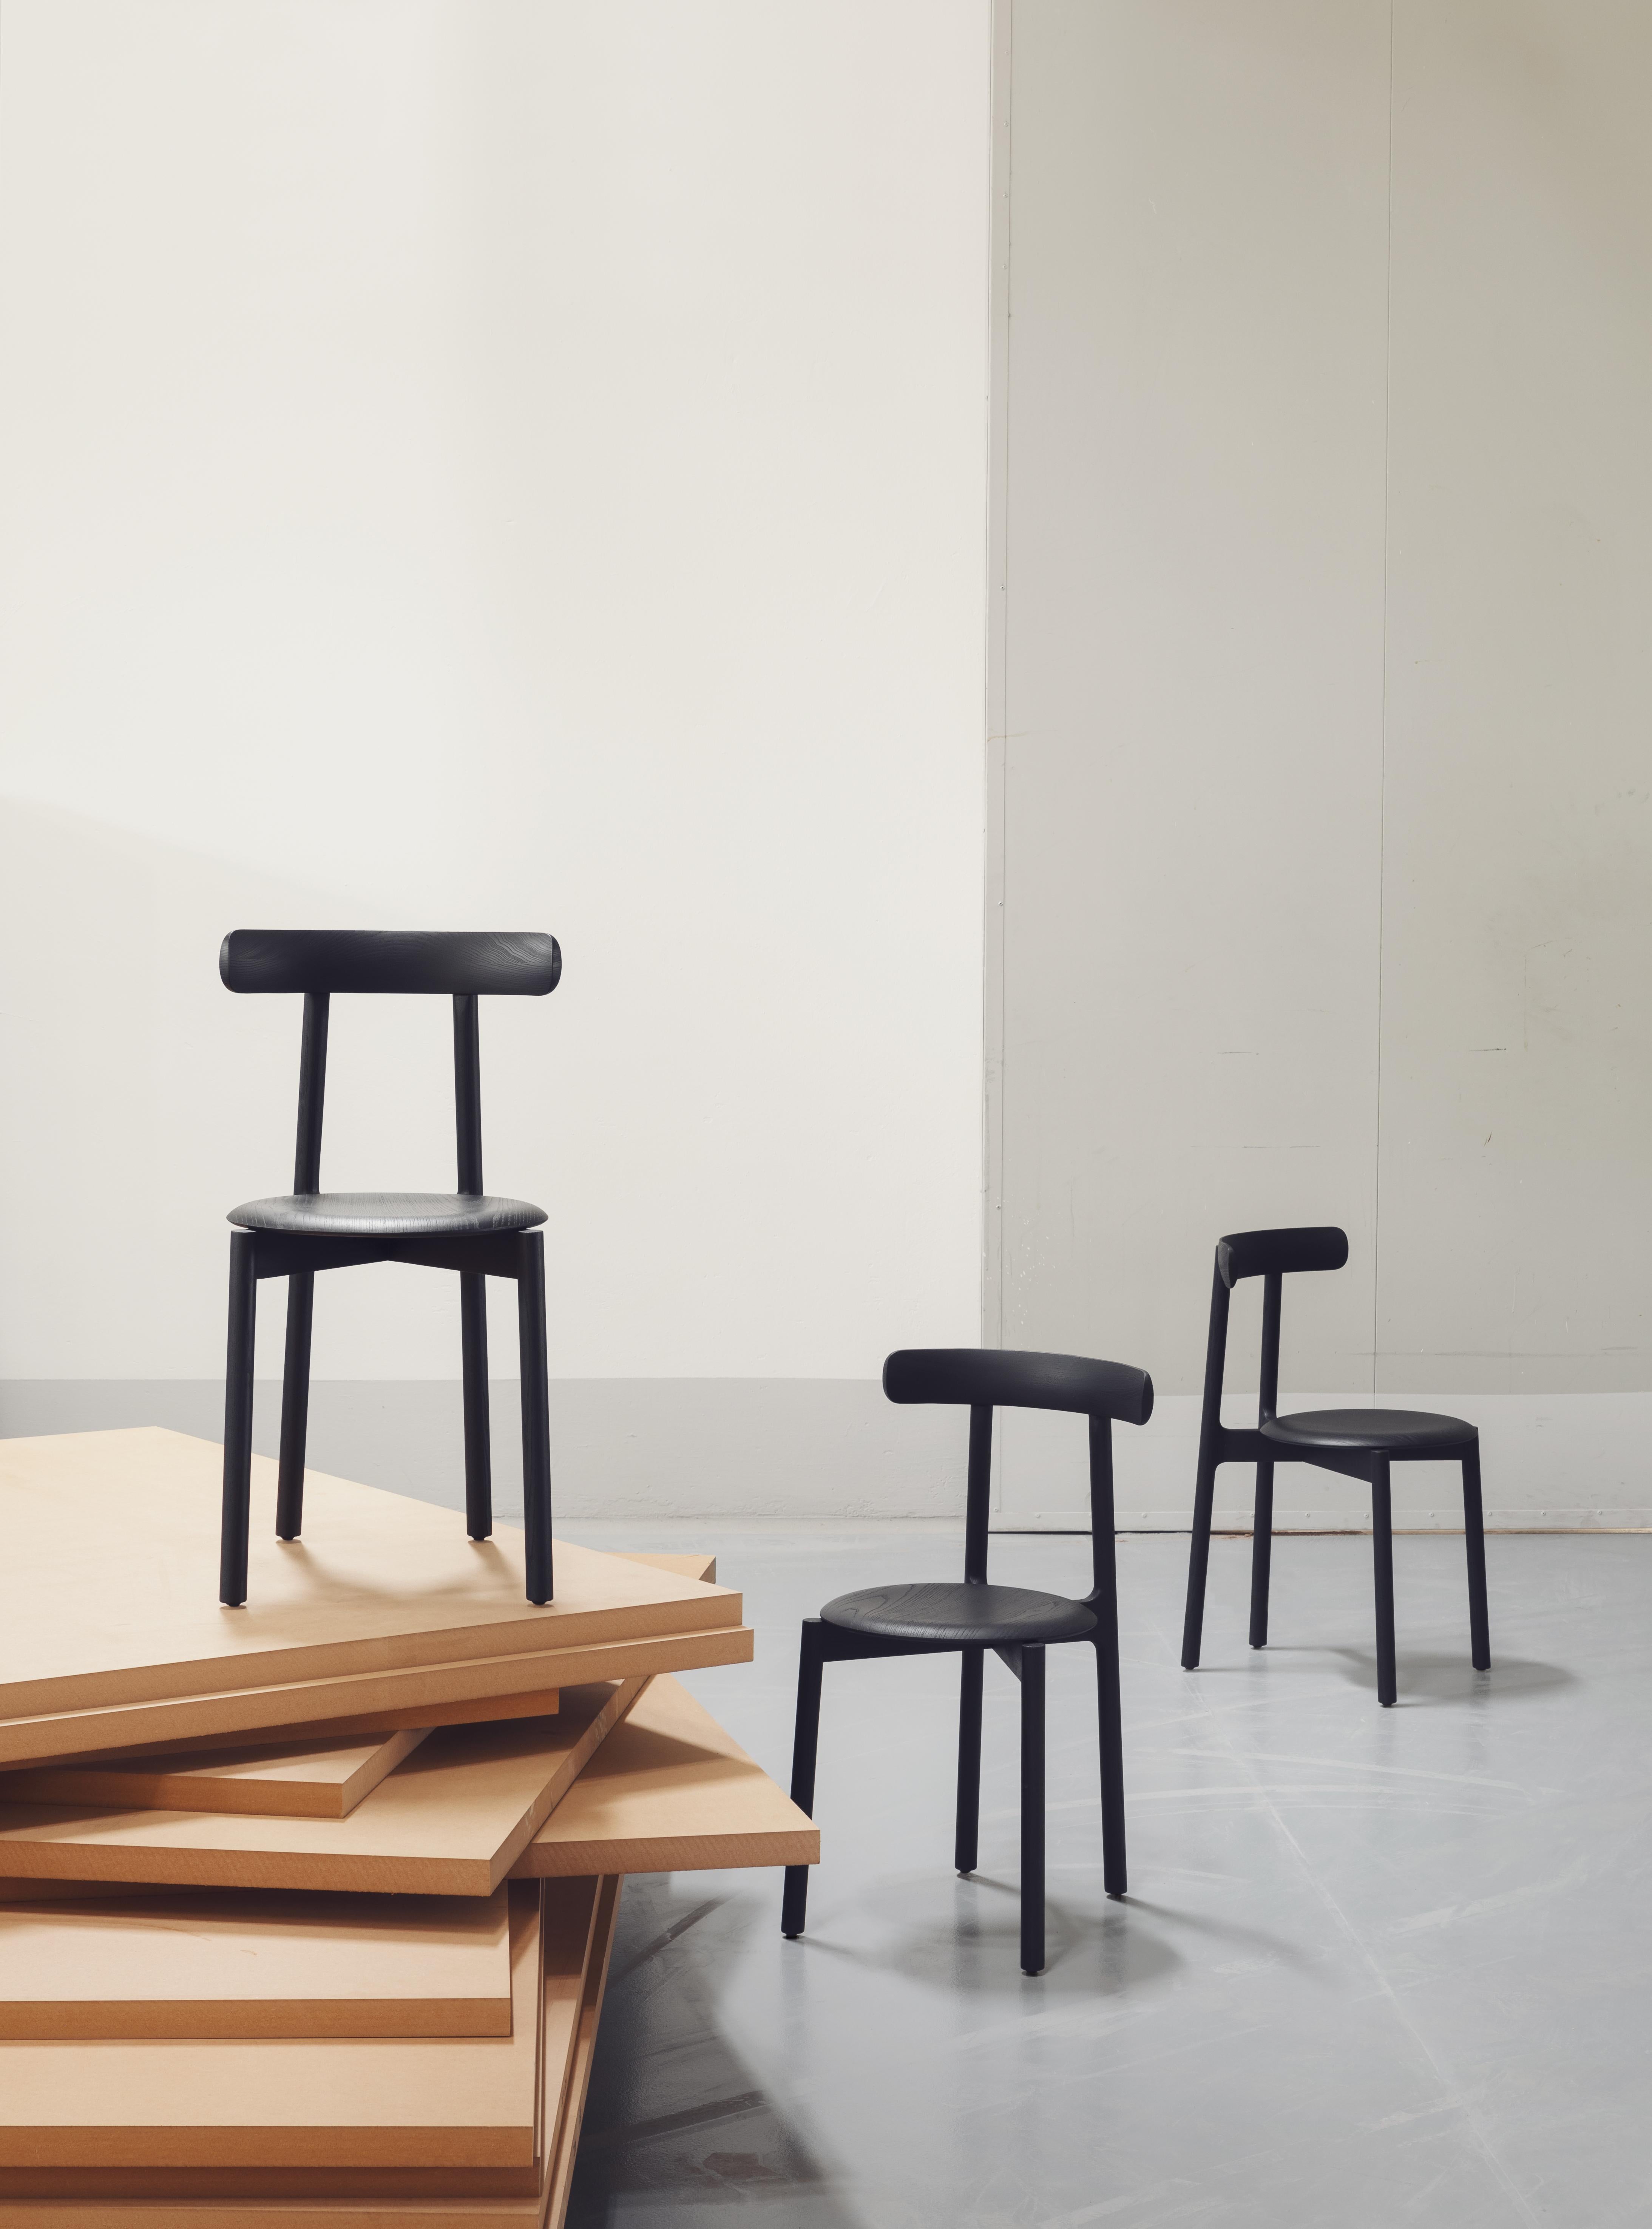 Biceis a slim and sometimes unusual chair. Its essential design is juxtaposed by its flap-ears backrest, which balances and characterises its structure.

Miniforms is a furniture designer based in Venice.
Or rather. Miniforms is a bizarre kind